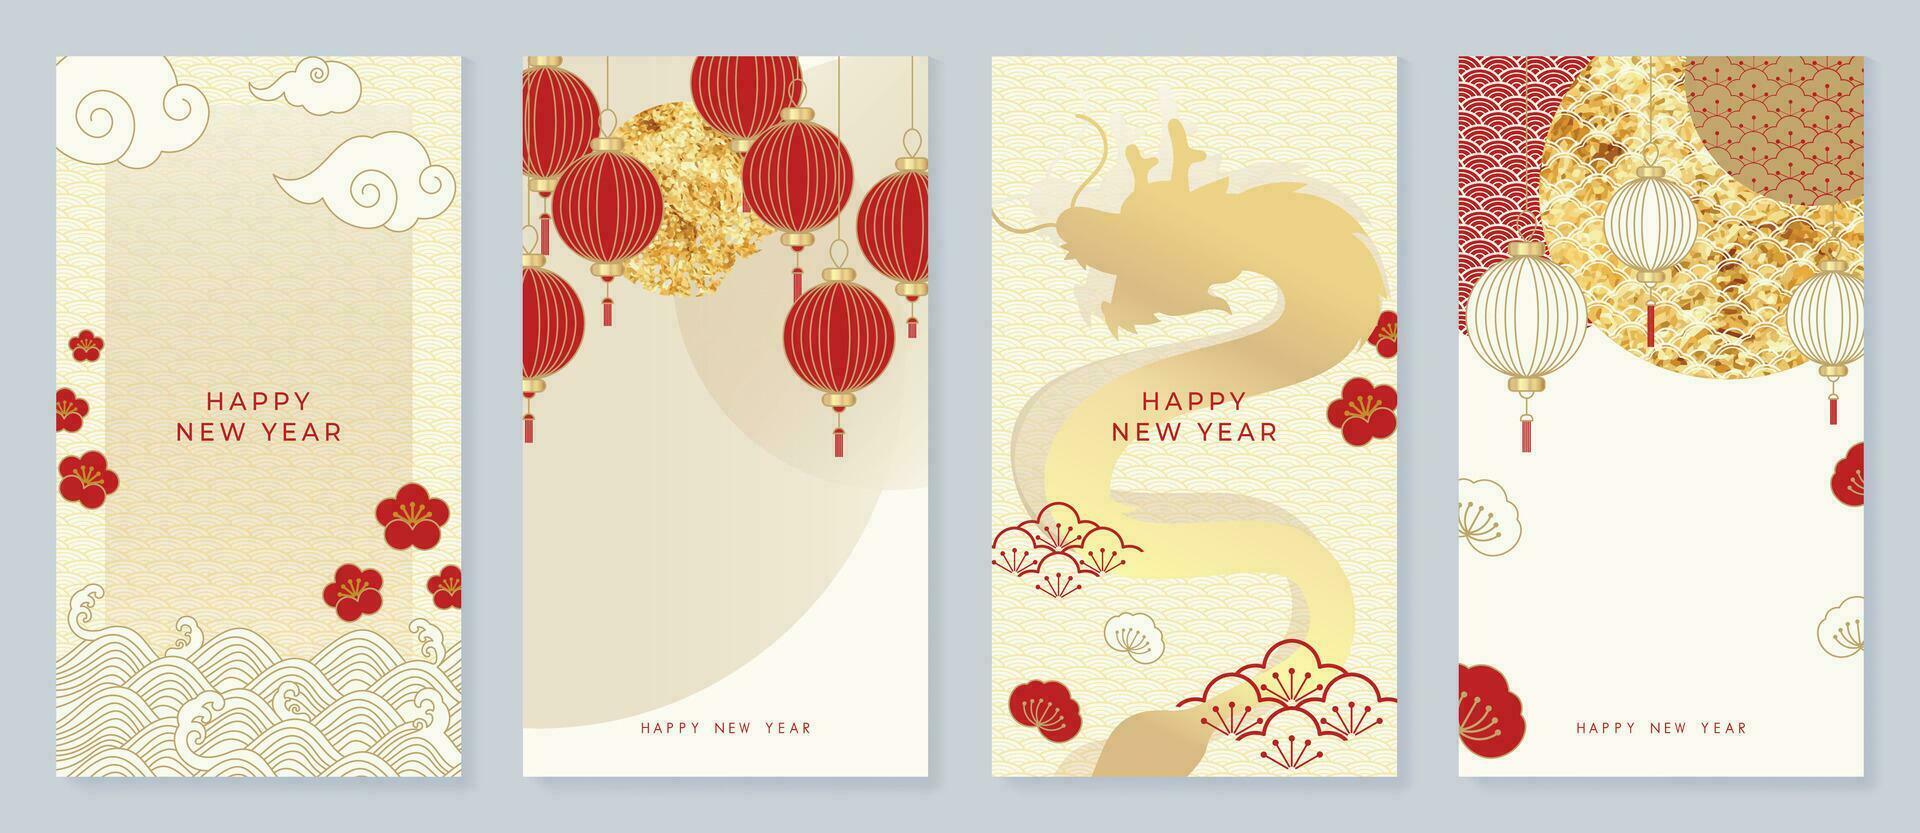 Chinese New Year cover background vector. Year of the dragon design with lanterns, sea wave, dragon, coin, flowers, firework, gold foil. Elegant oriental illustration for cover, banner, website. vector